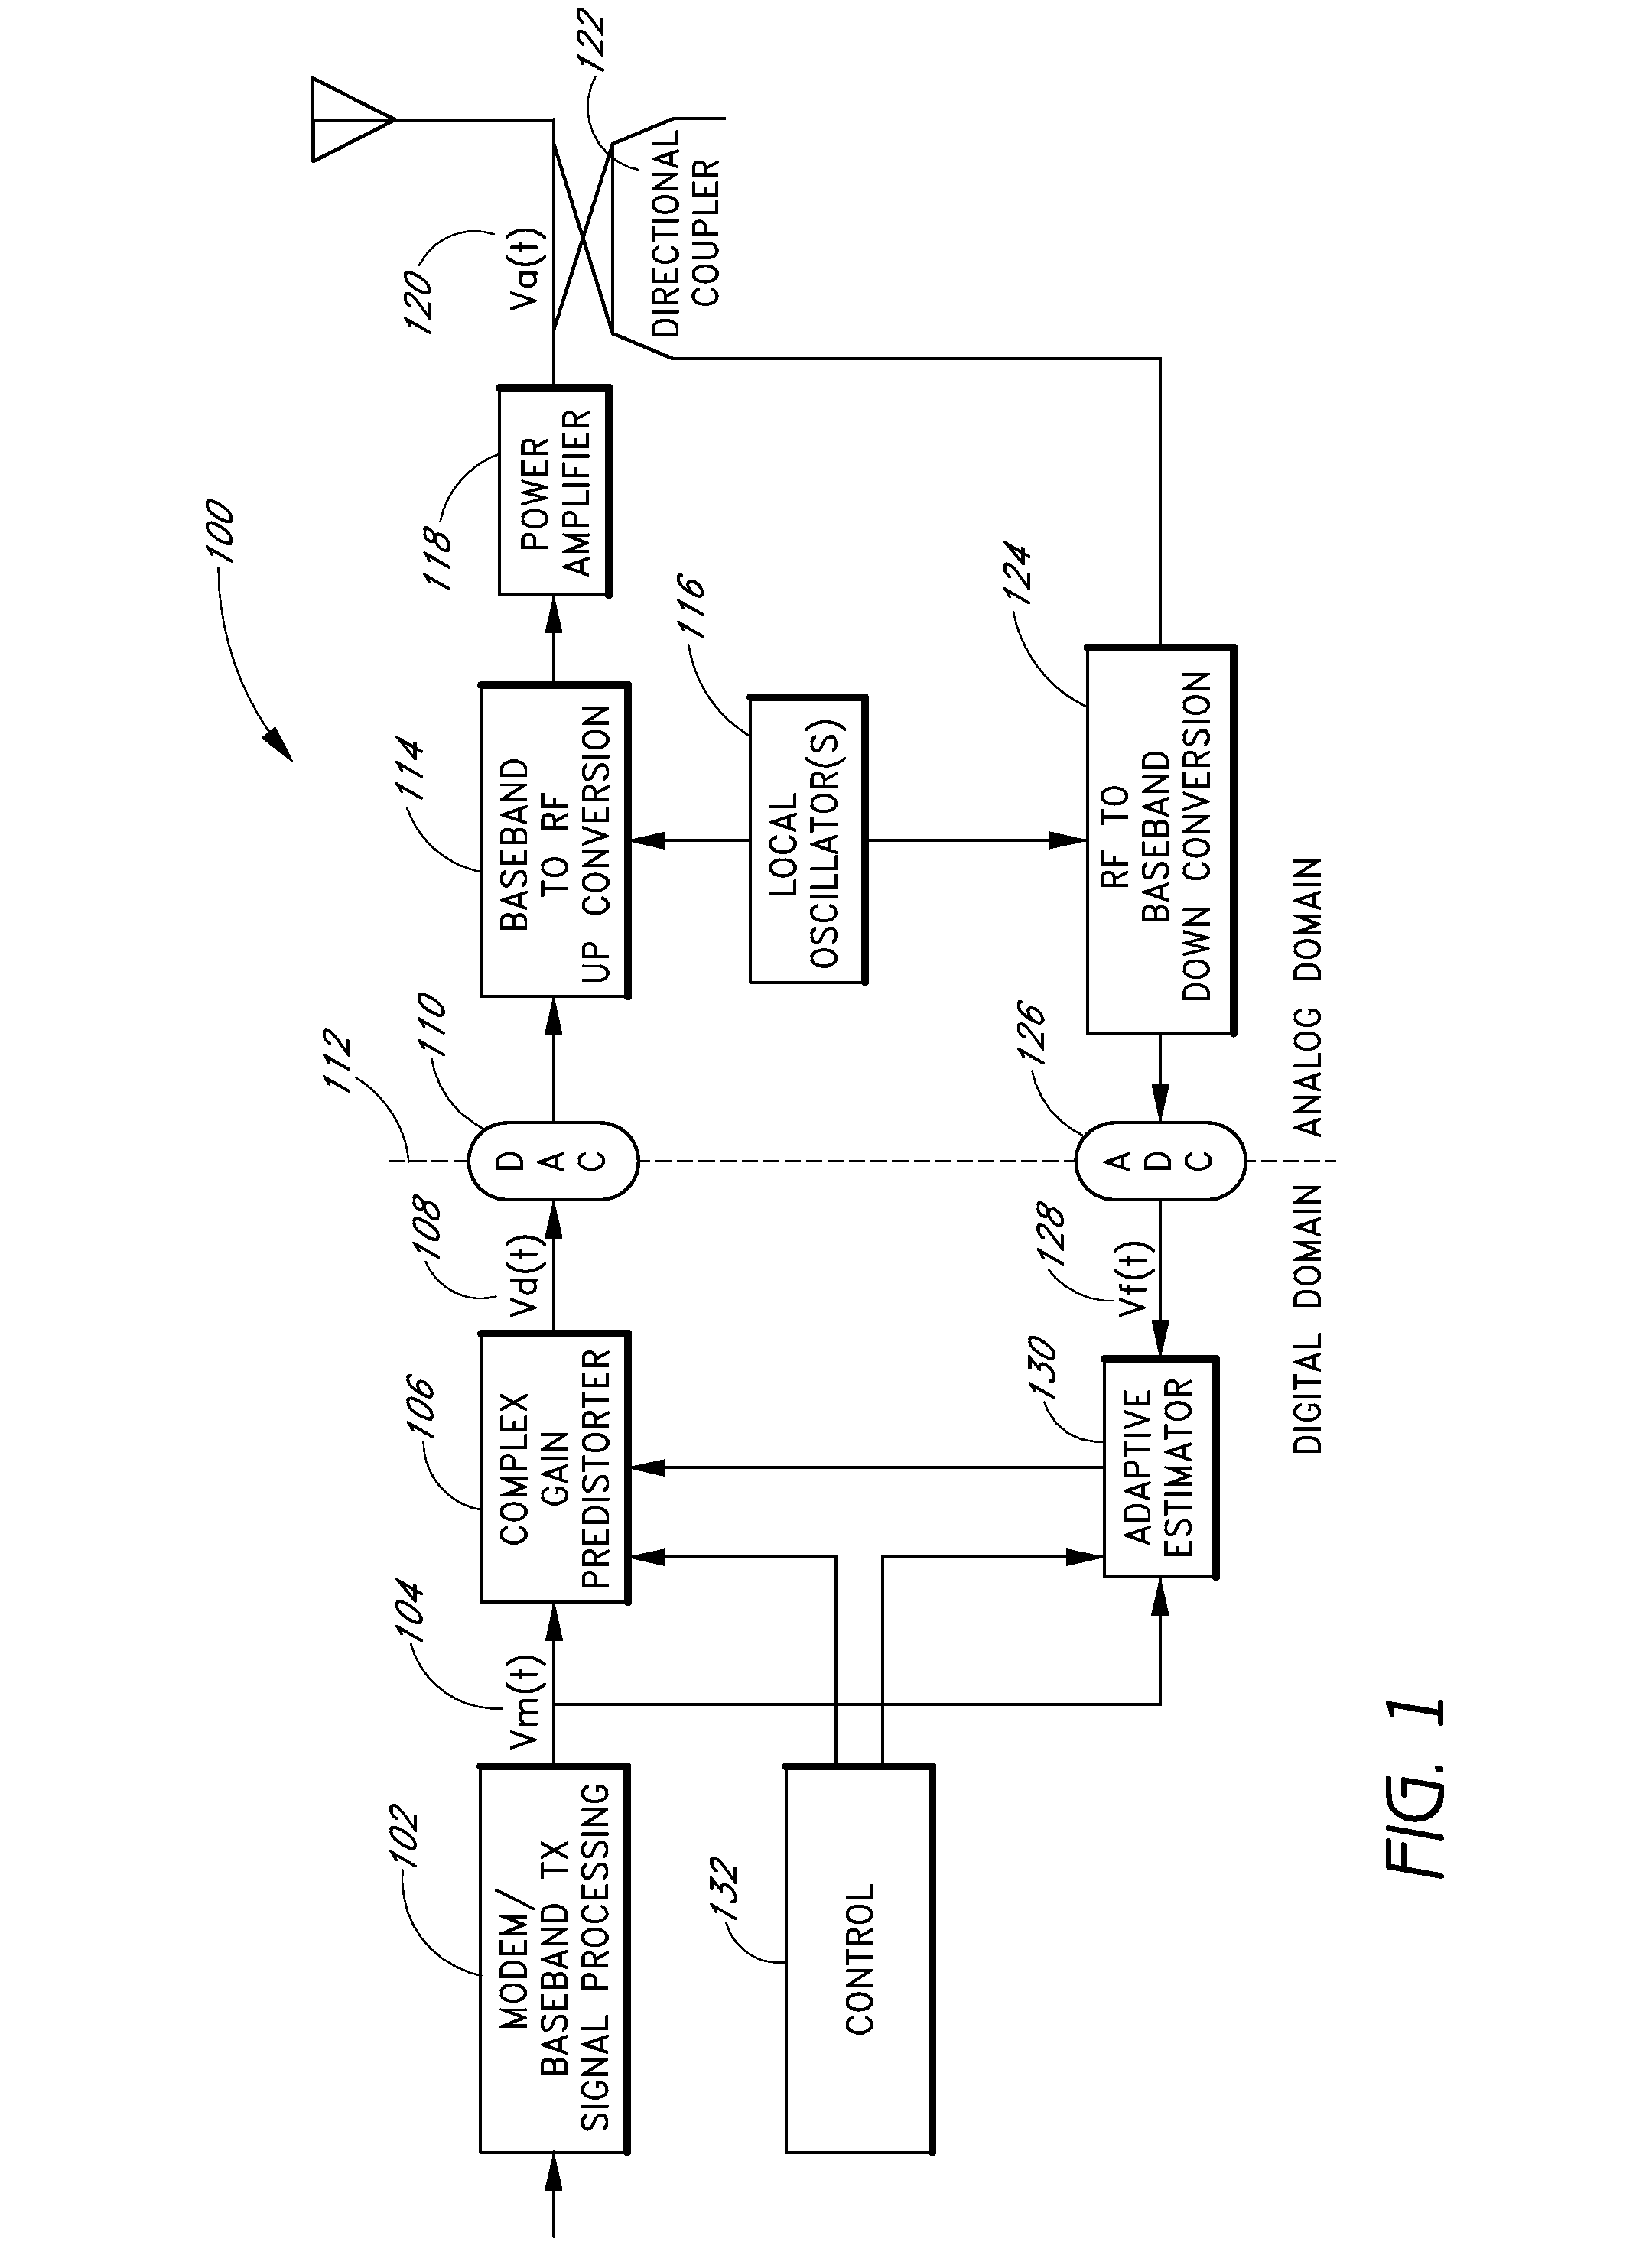 Adaptive predistortion of non-linear amplifiers with burst data